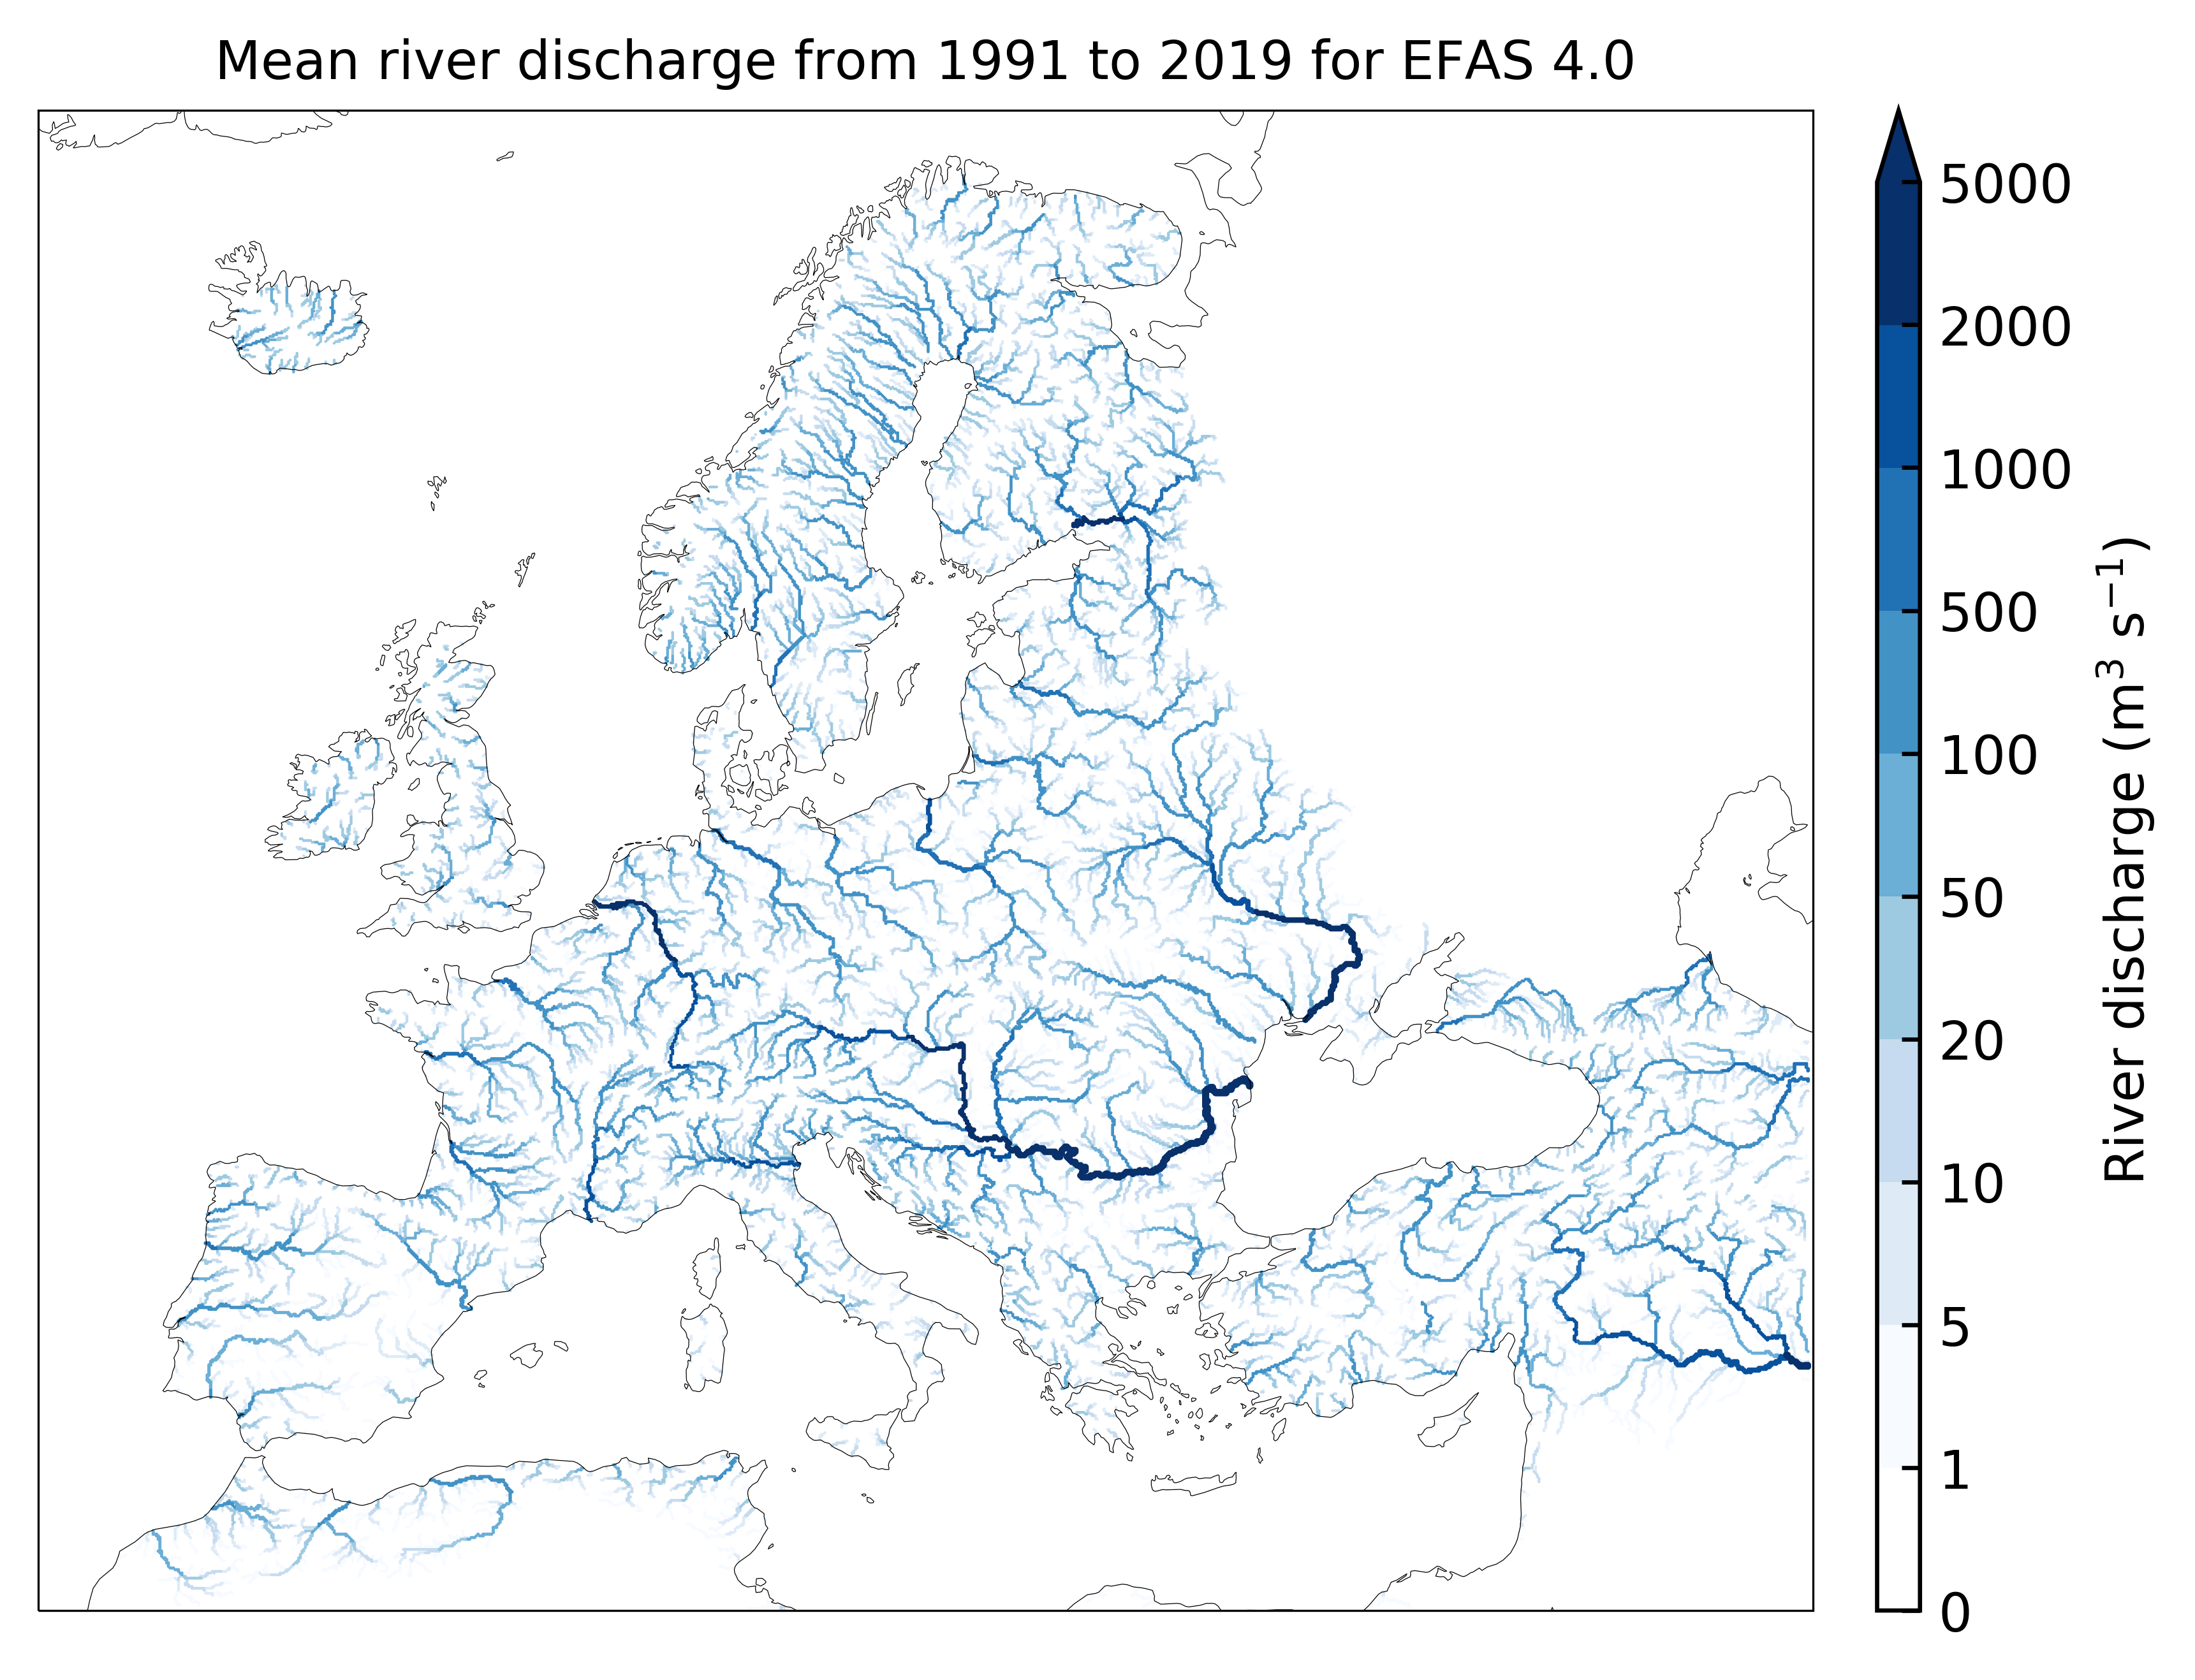 Mean discharge of rivers and streams in EFAS 1991-2019